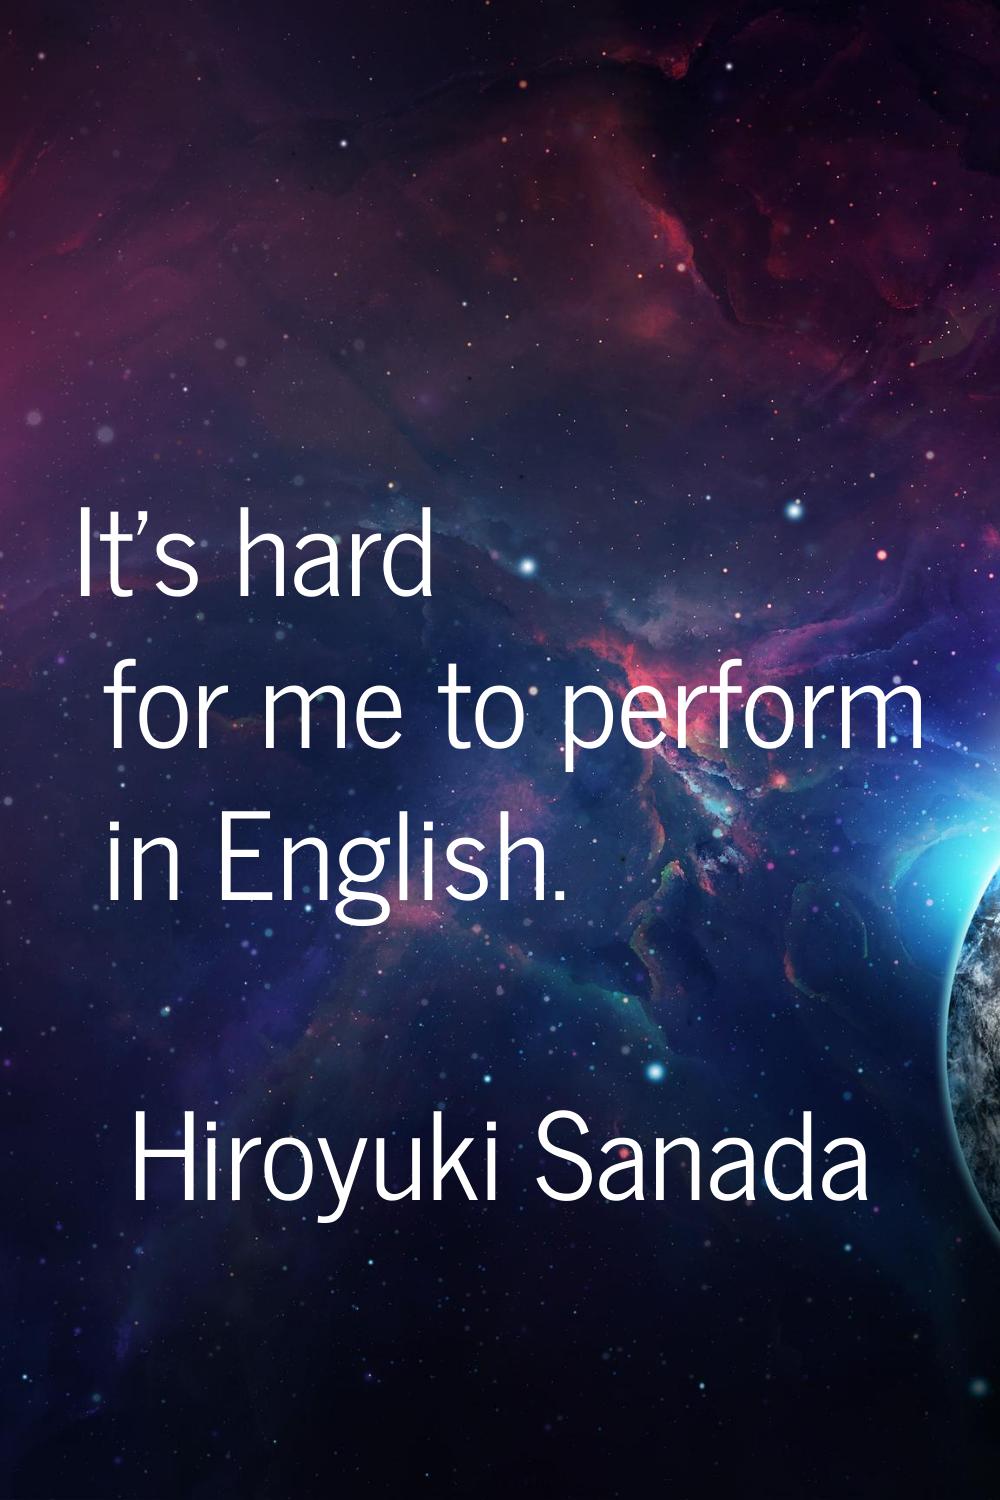 It's hard for me to perform in English.